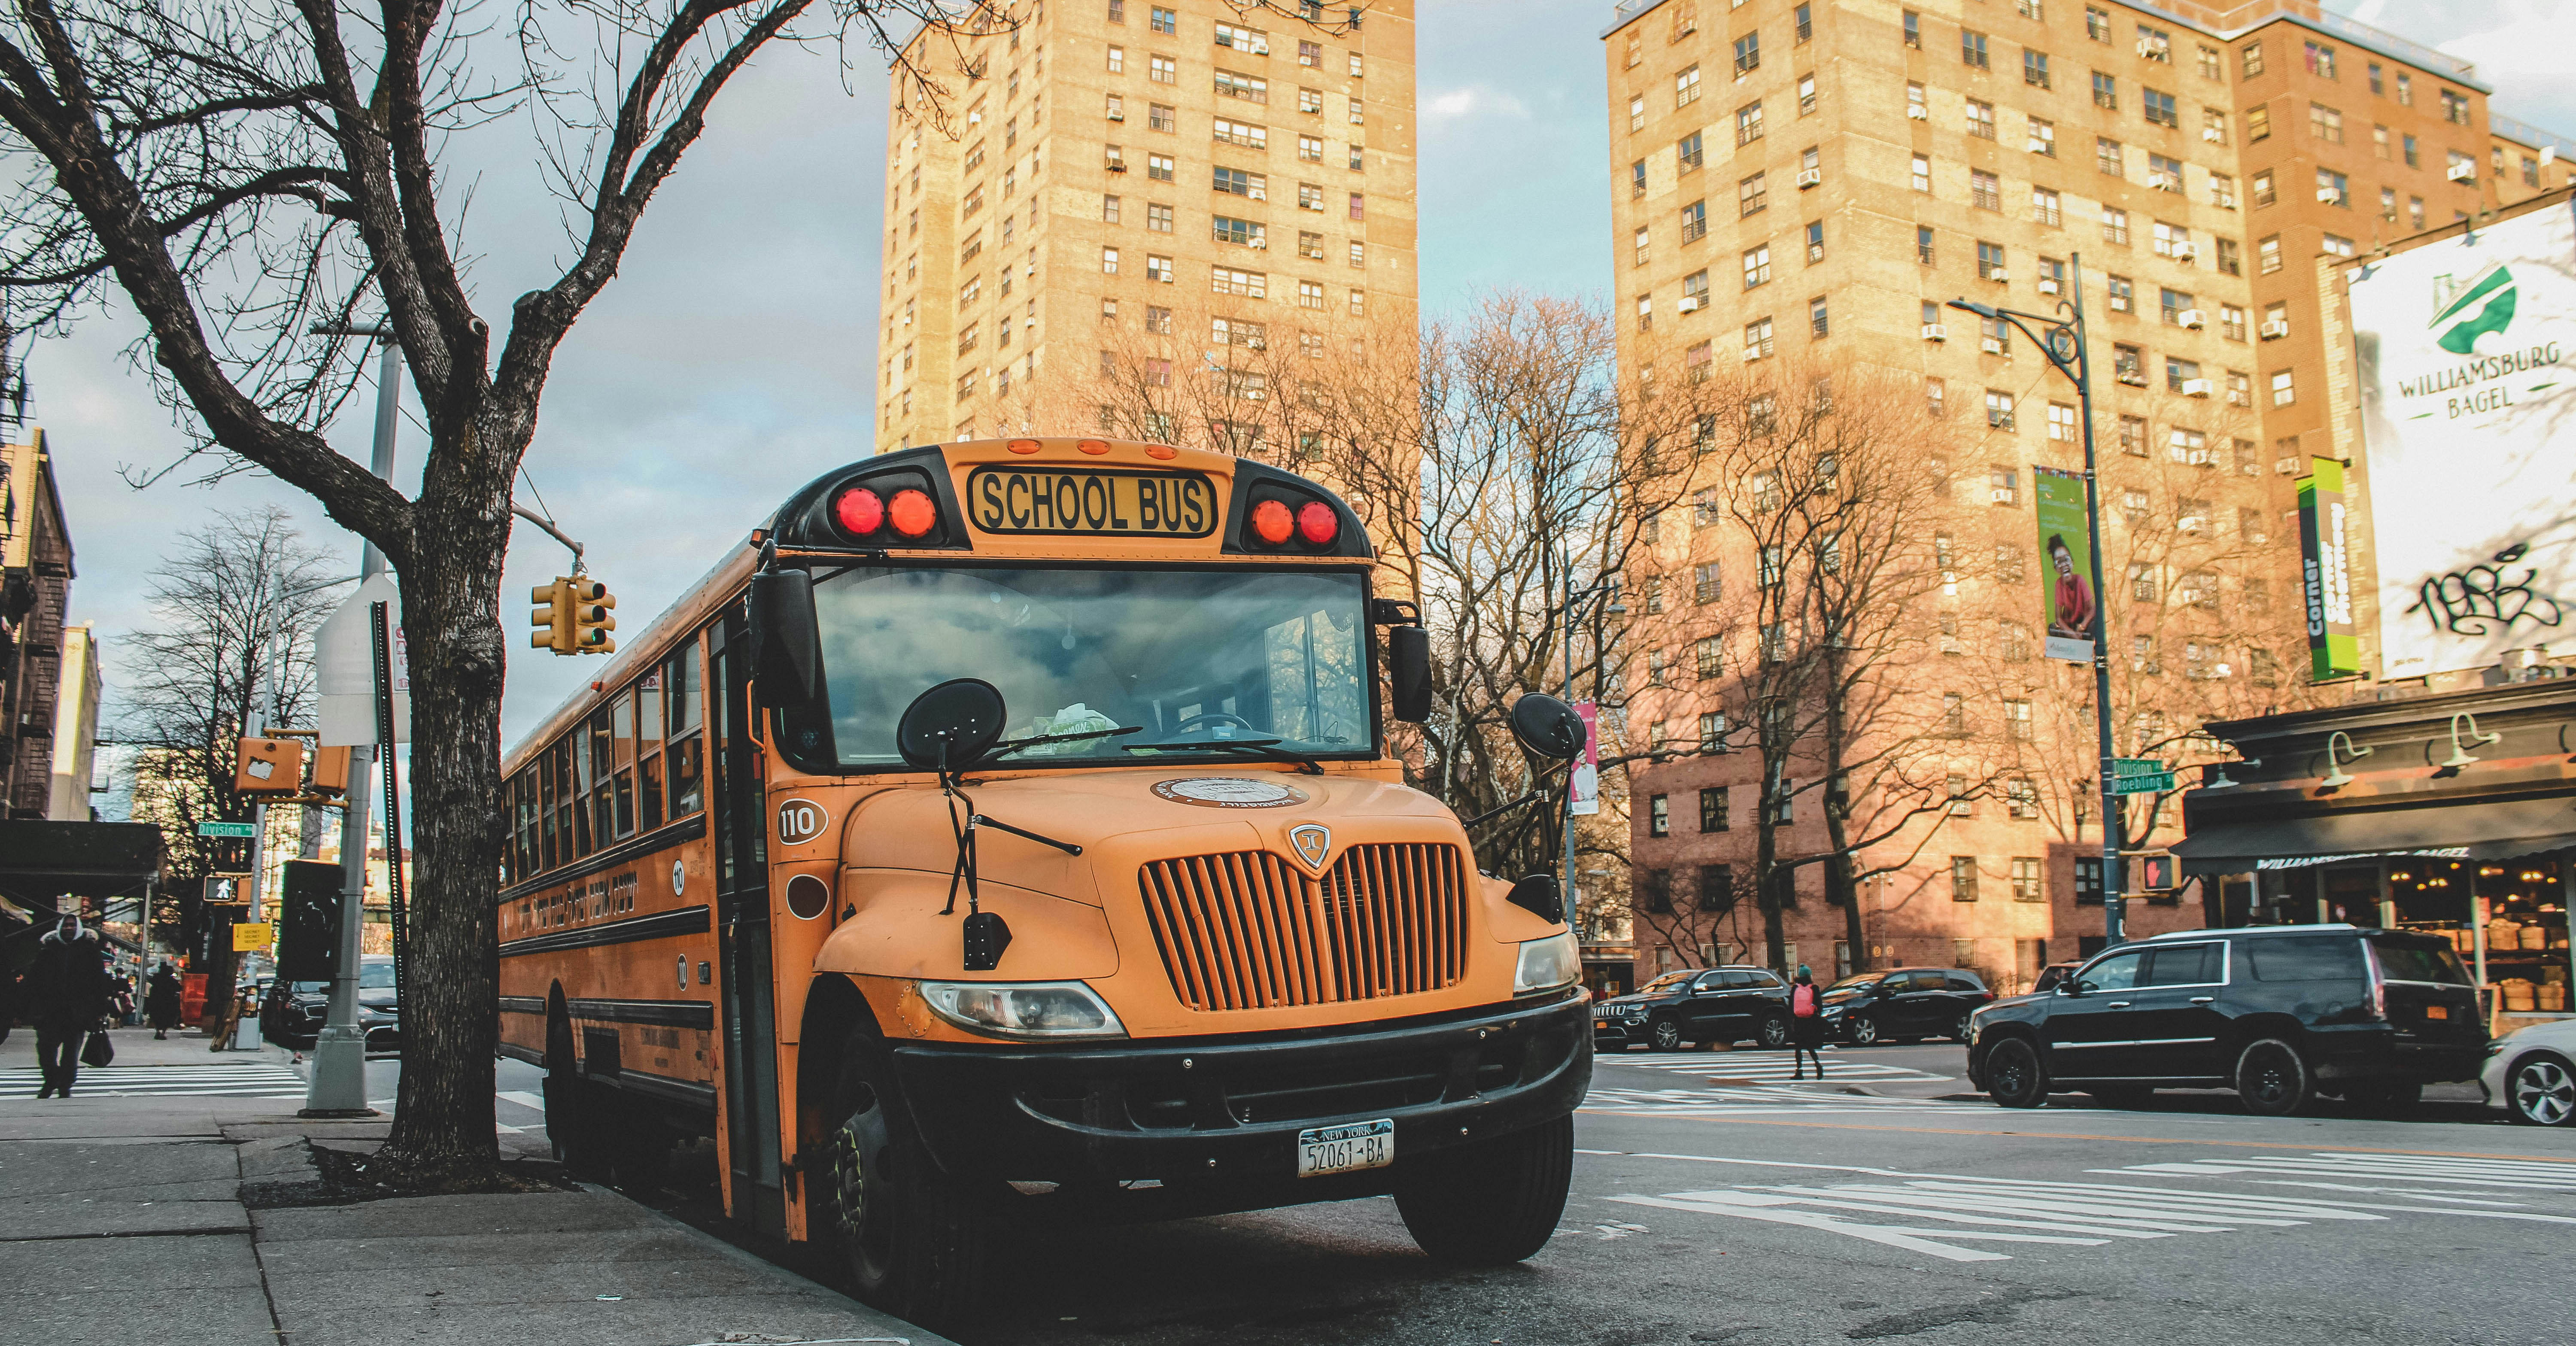 Could riding older school buses hinder student performance?